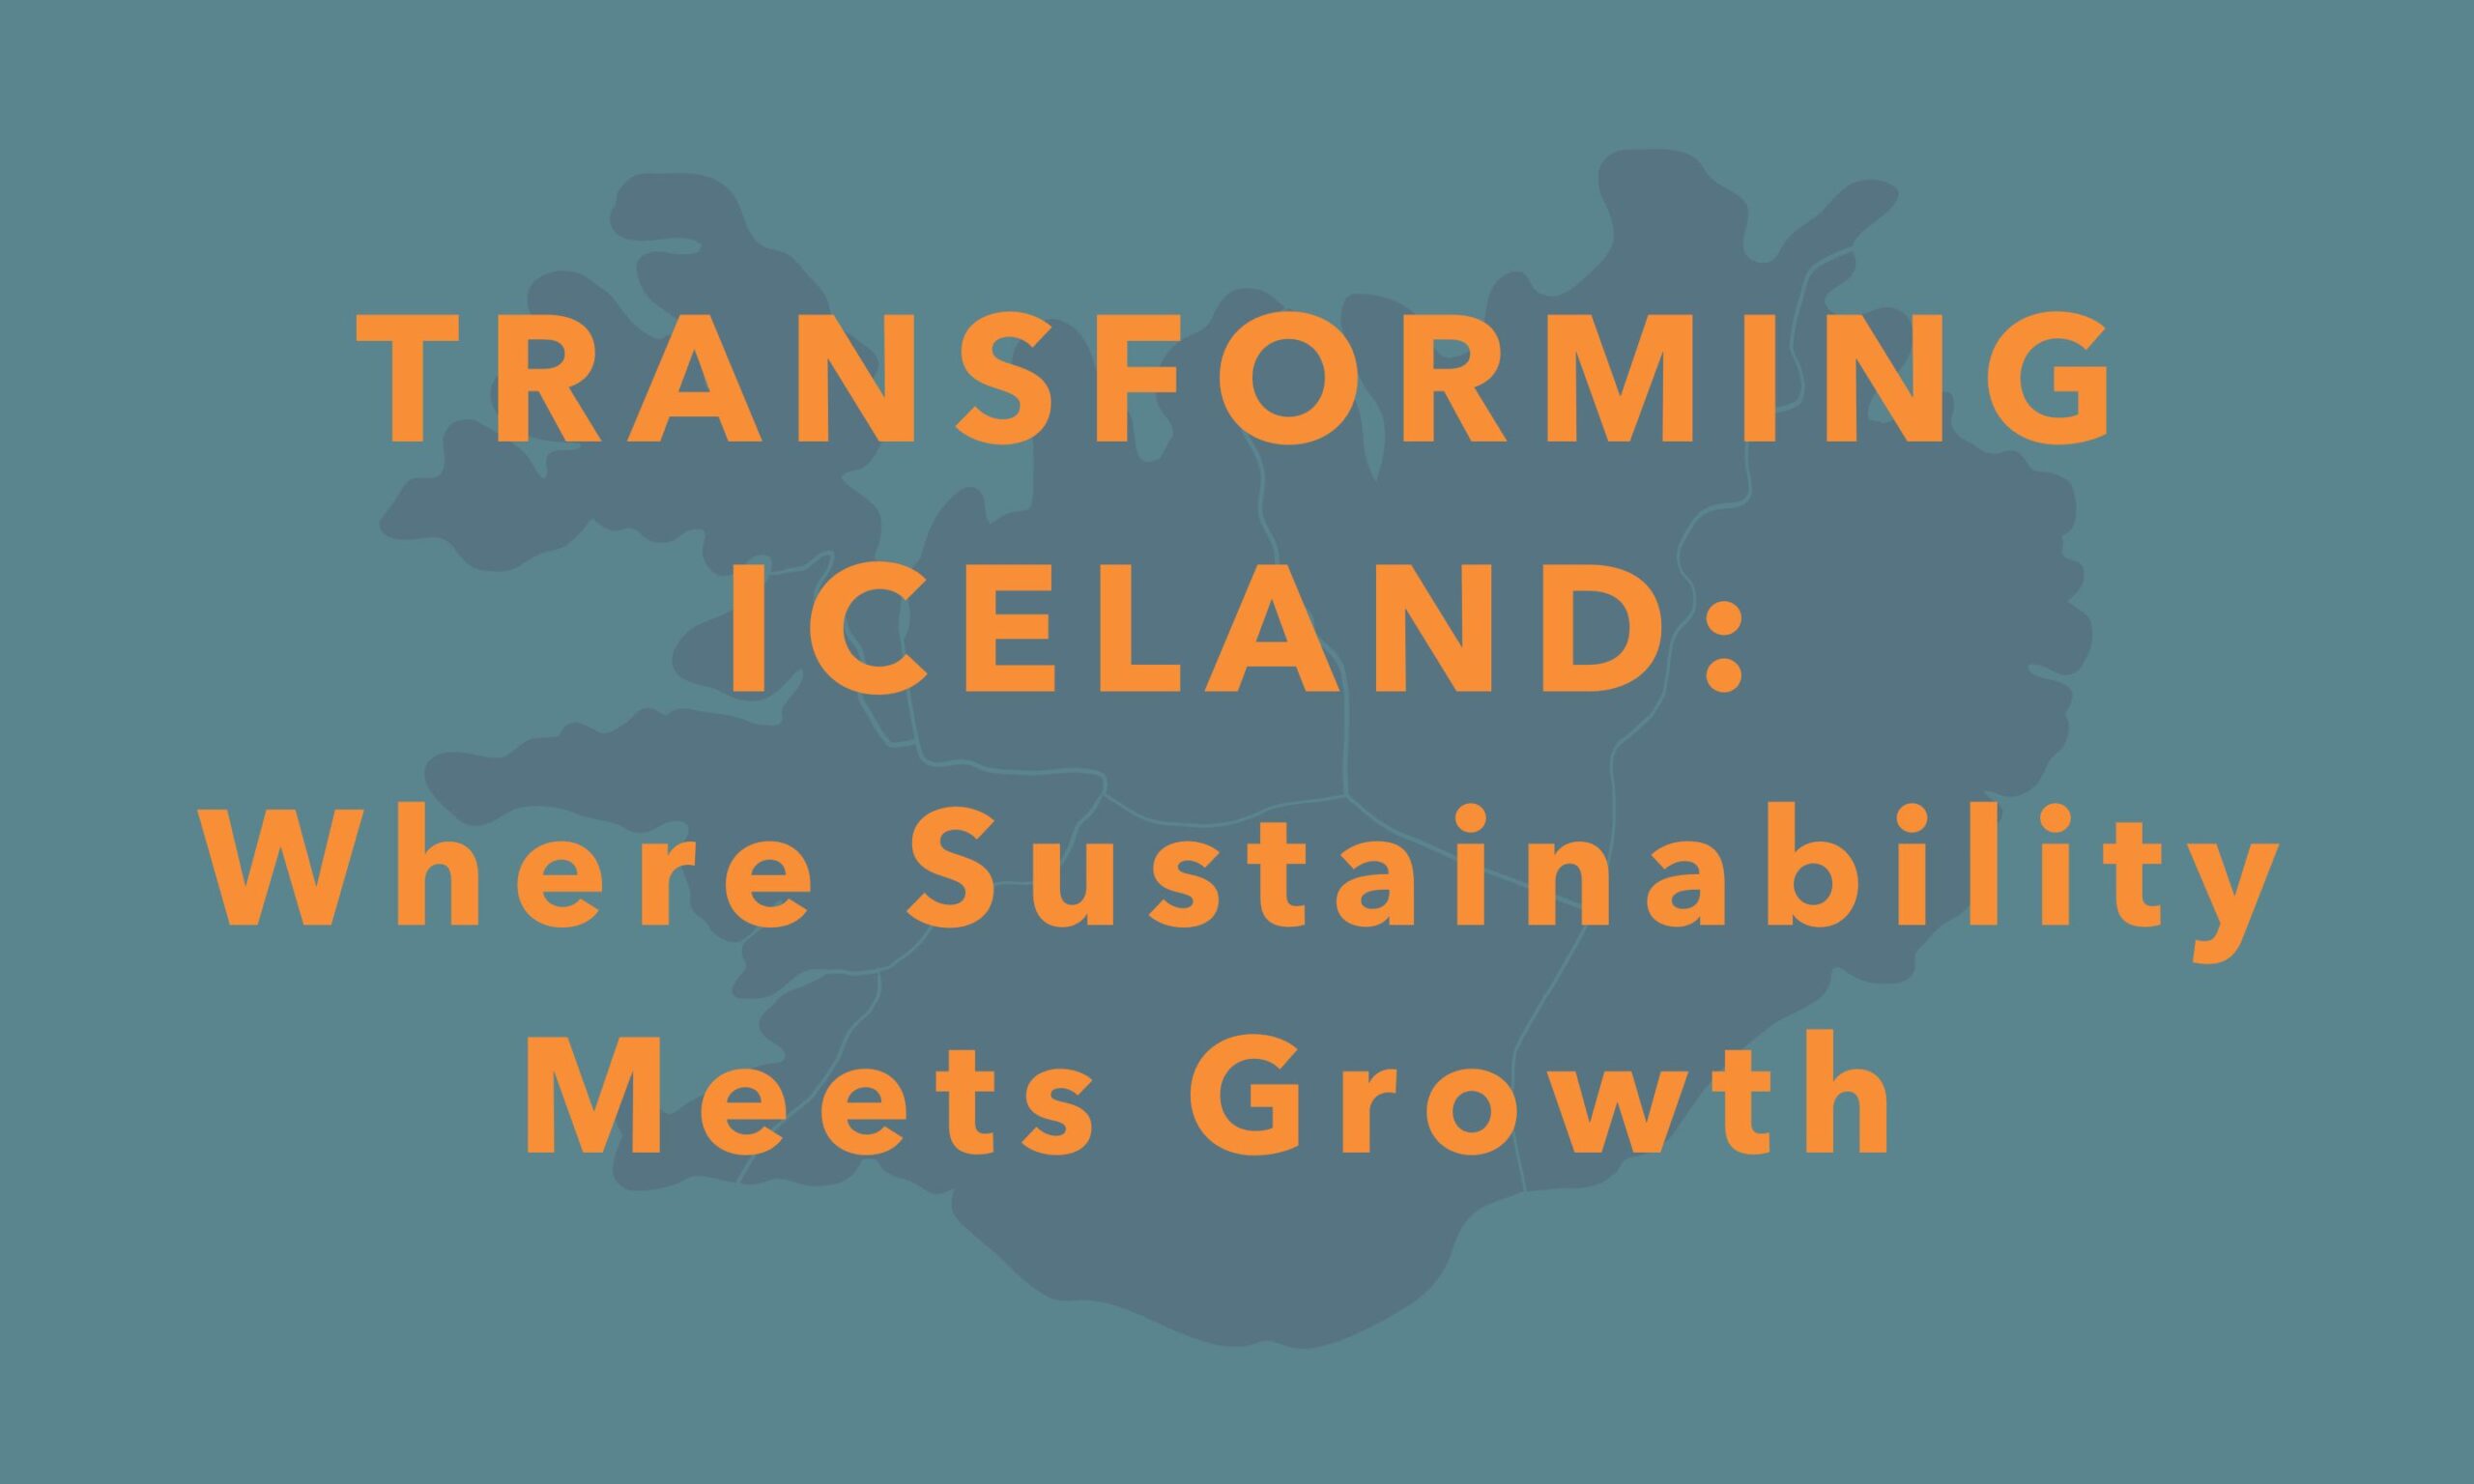 Transforming Iceland: Where Sustainability Meets Growth